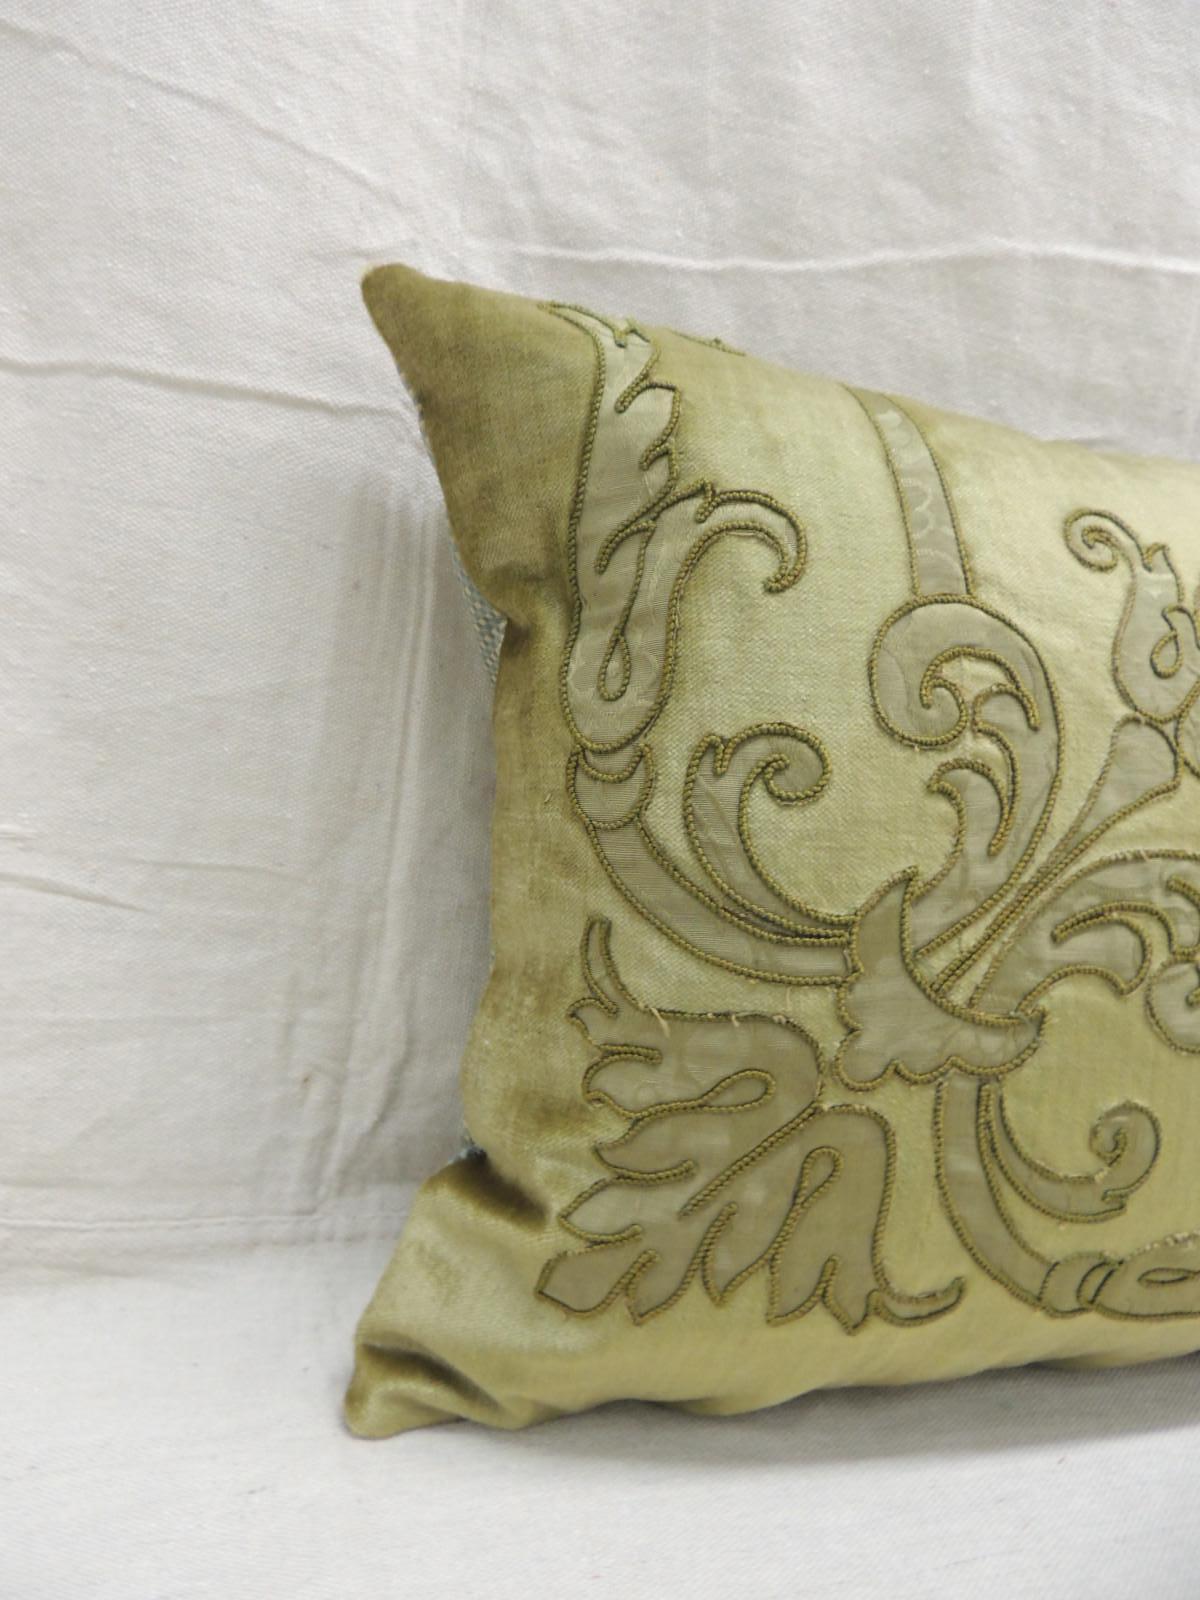 Antique silk velvet olive green applique decorative bolster pillow.
Silk brocade embroidered green silk threads and applied onto silk velvet.
(New) small check green and gold pattern was used on backings.
This textile was originally a table